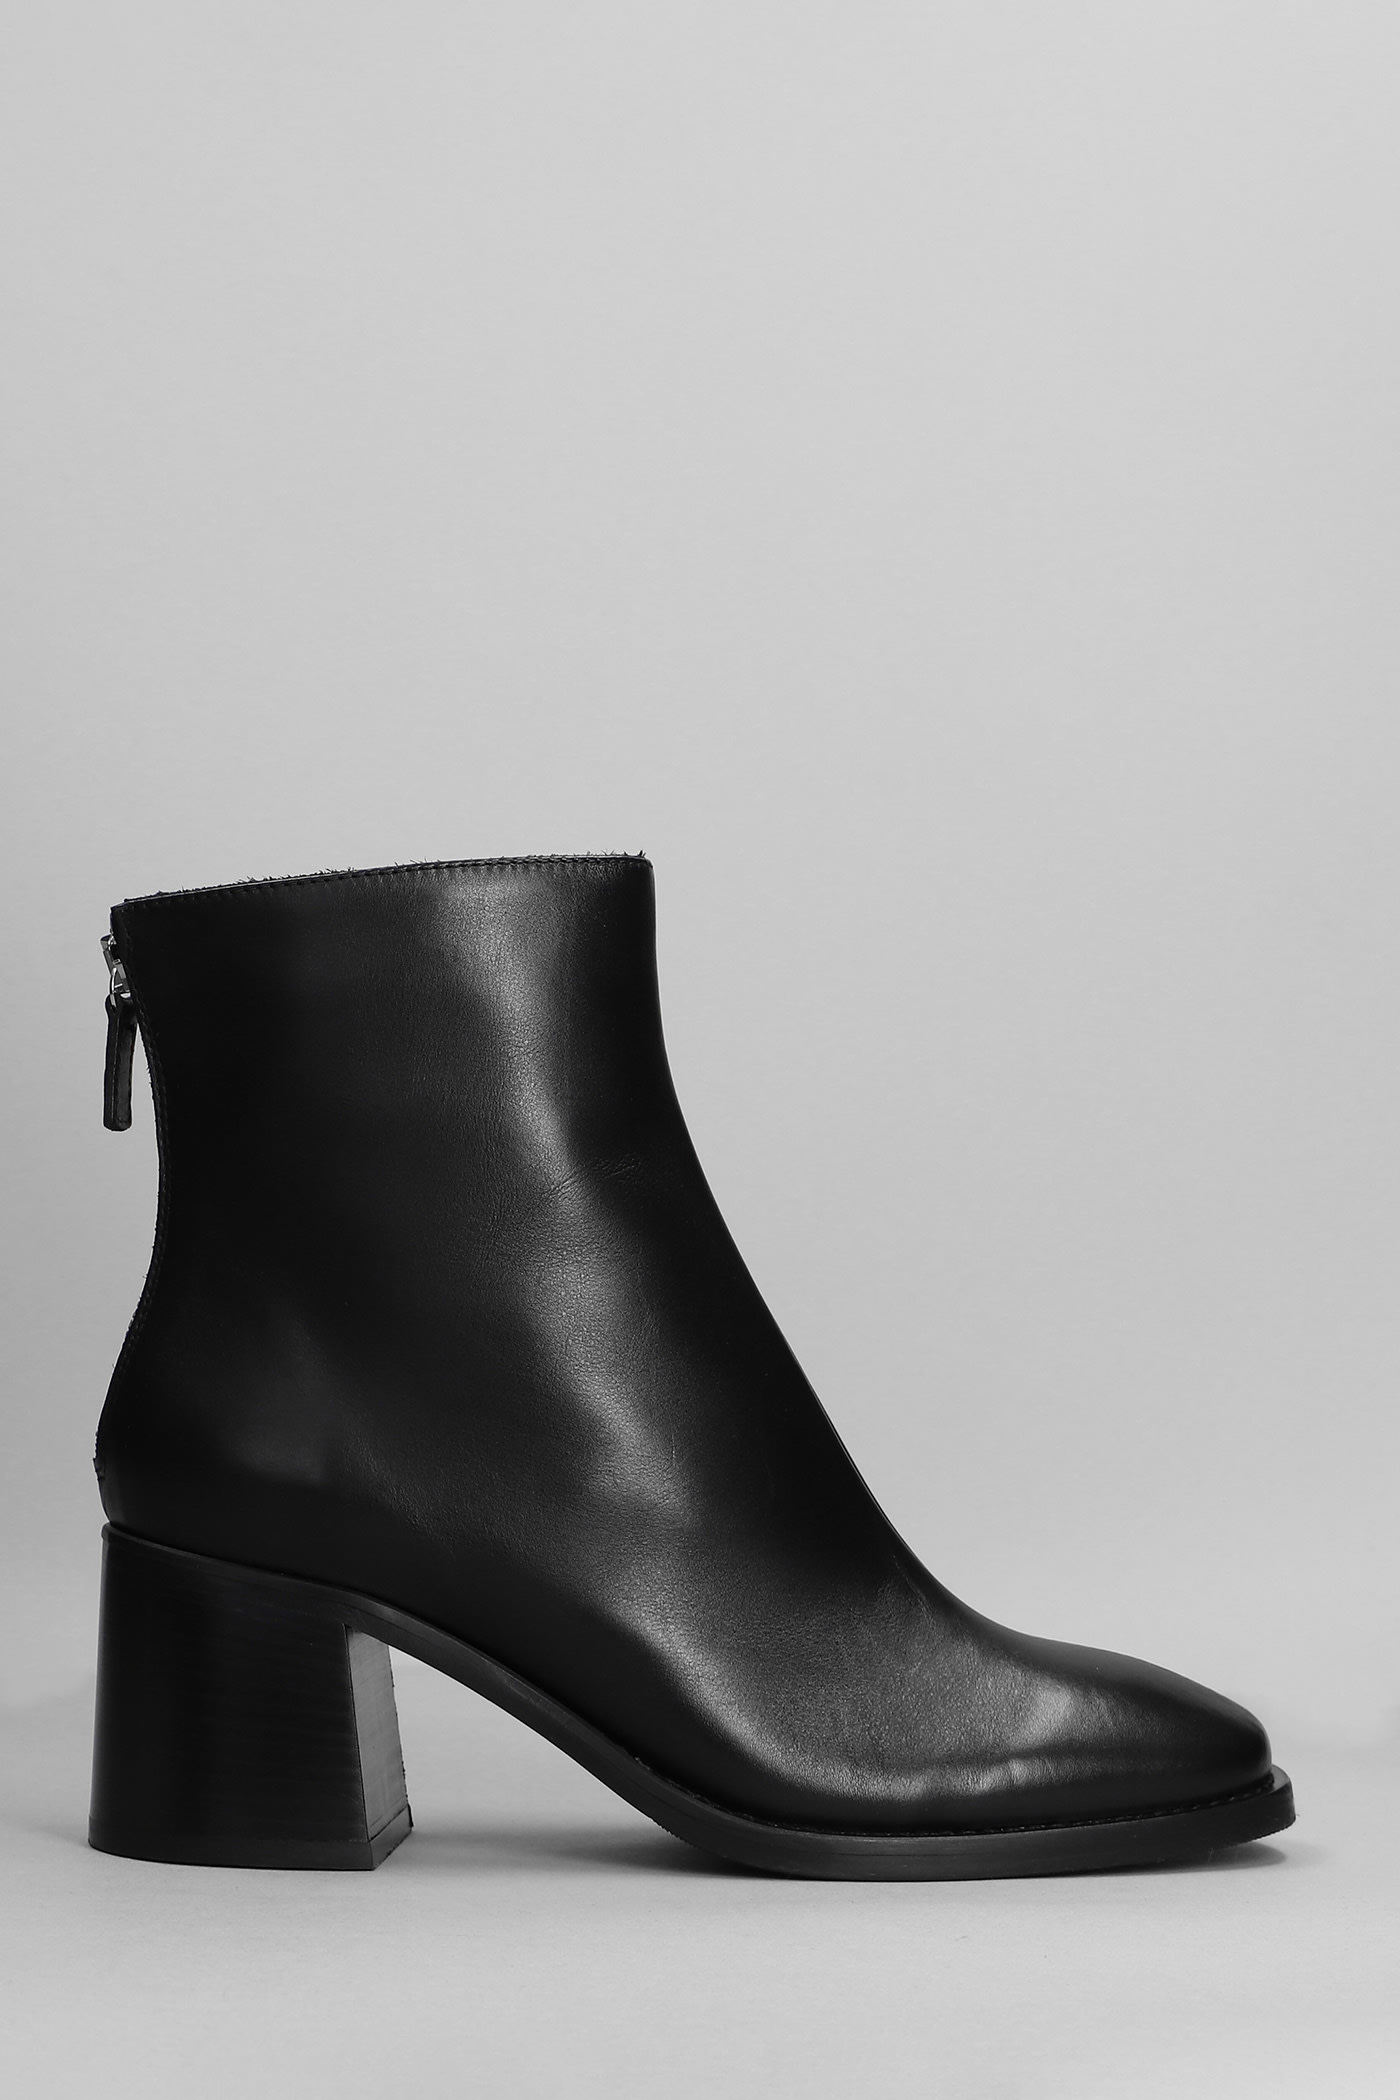 Fabio Rusconi High Heels Ankle Boots In Black Leather